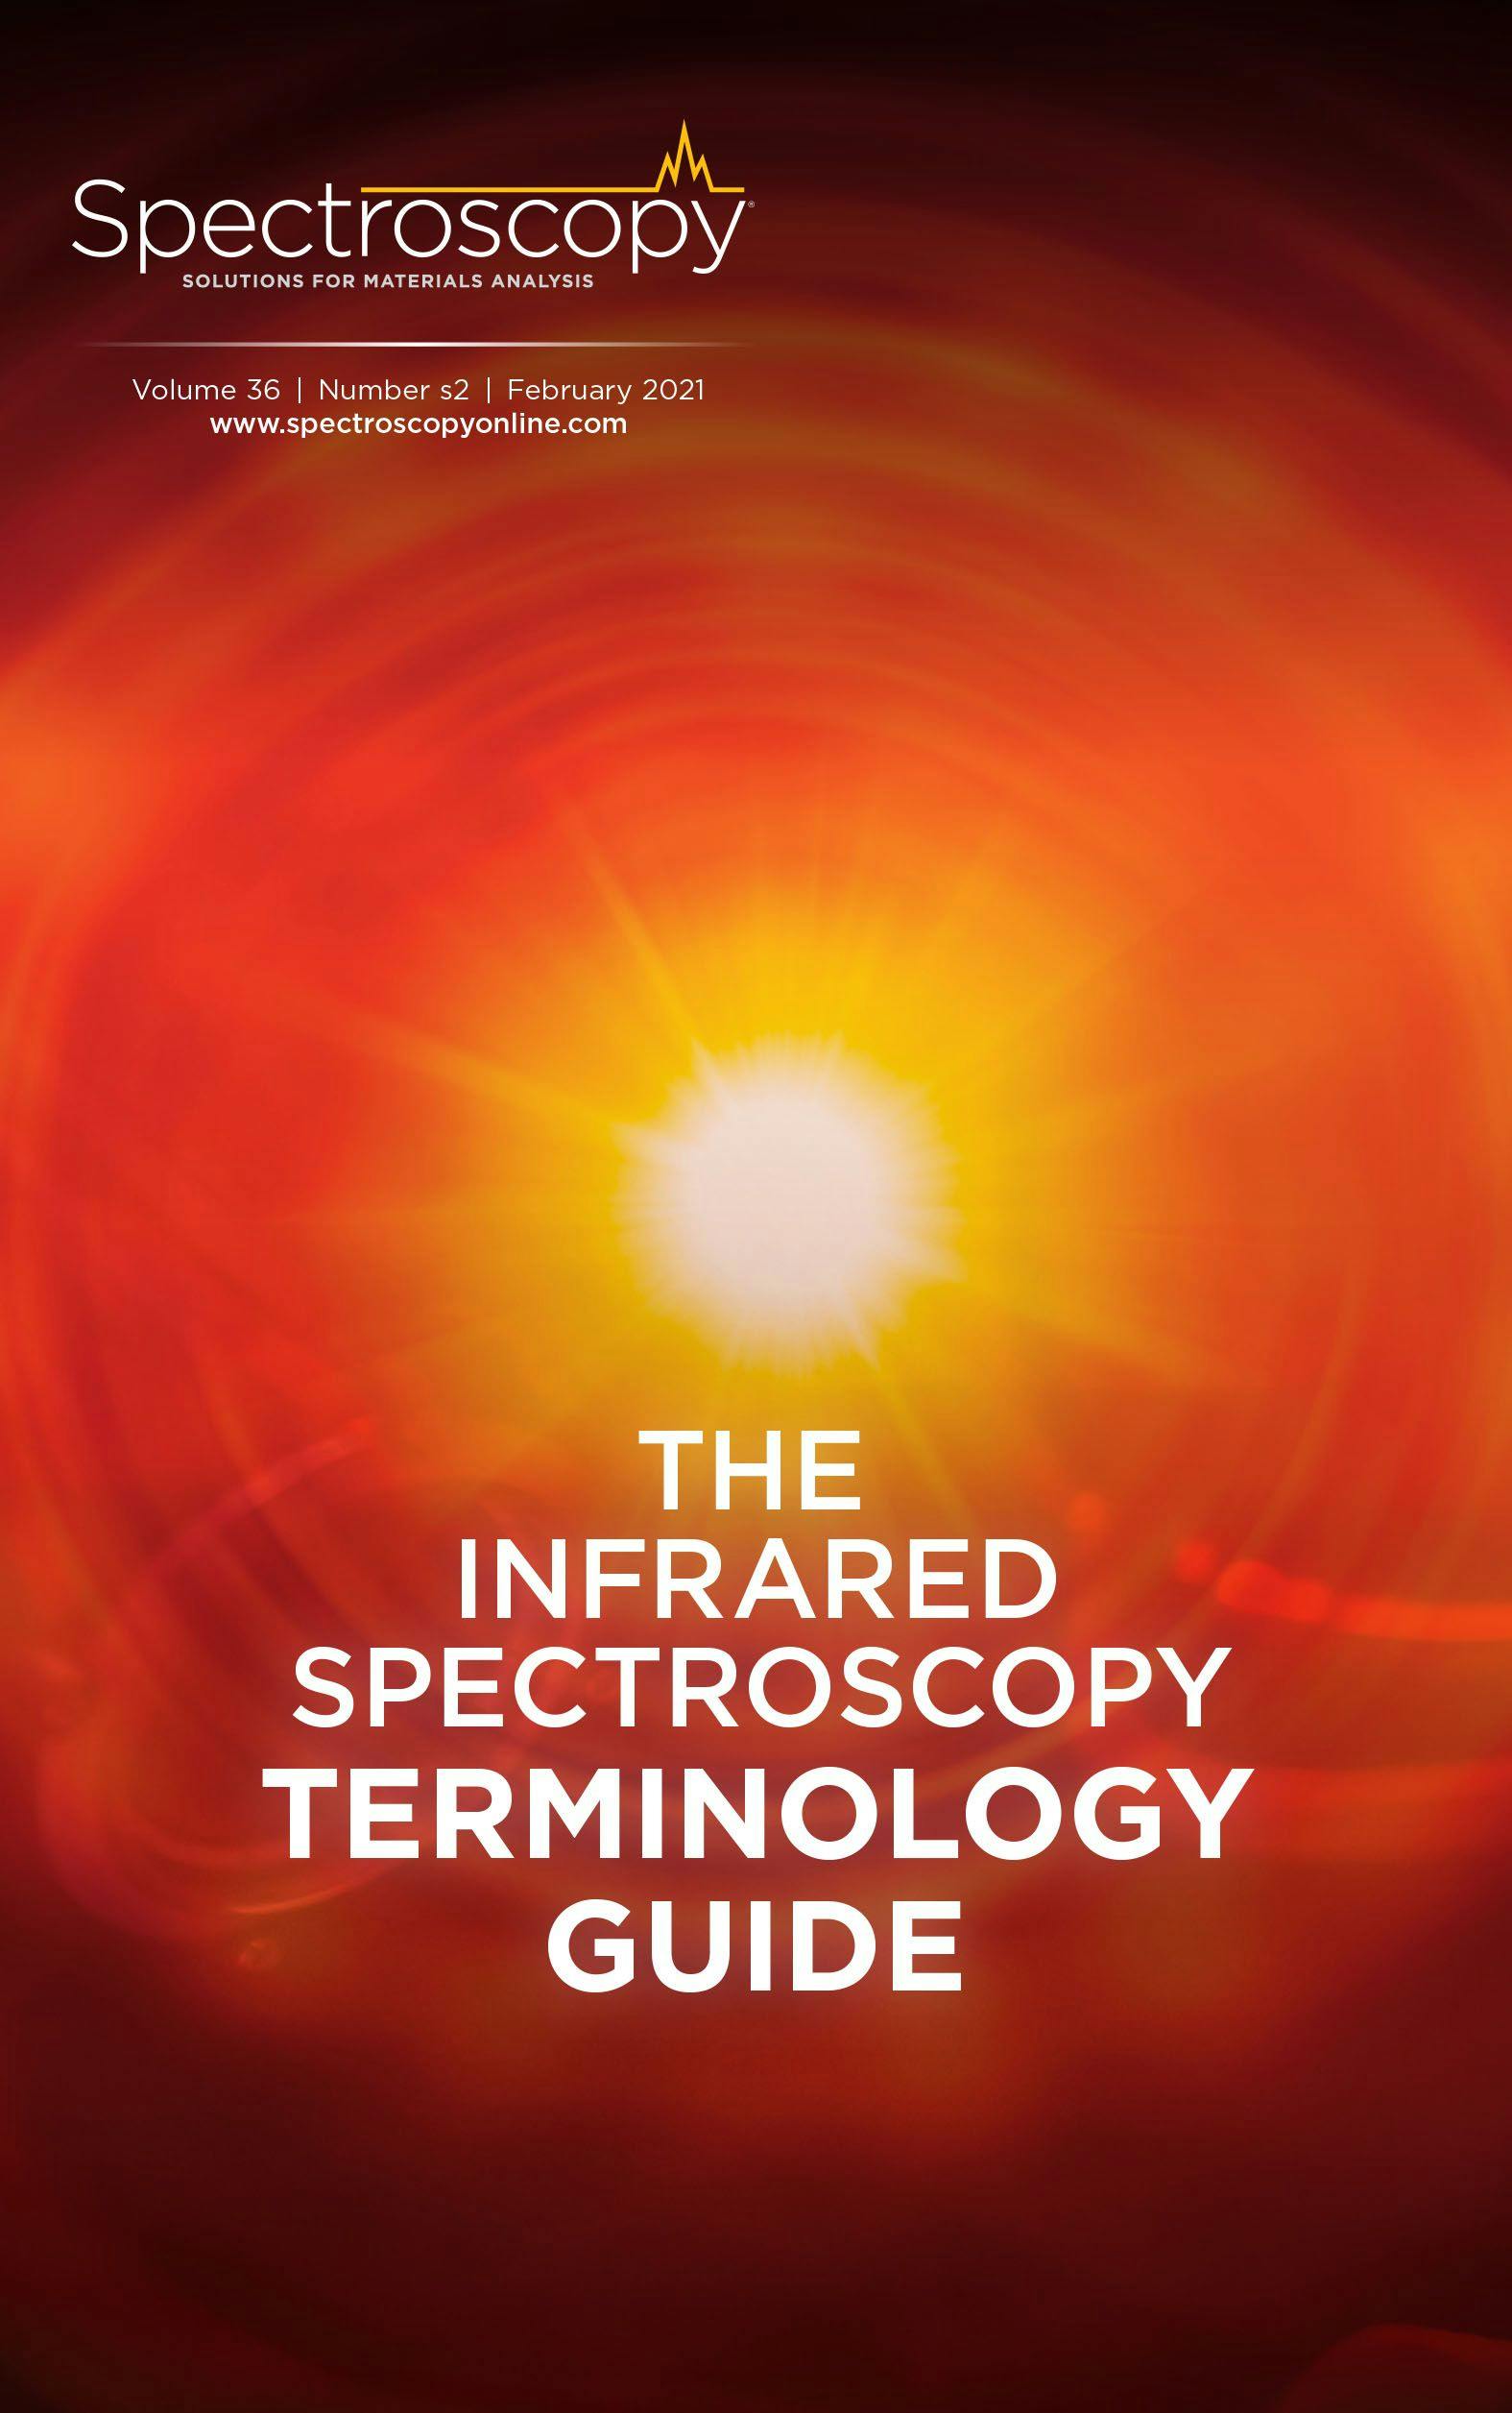 The Infrared Spectroscopy Terminology Guide